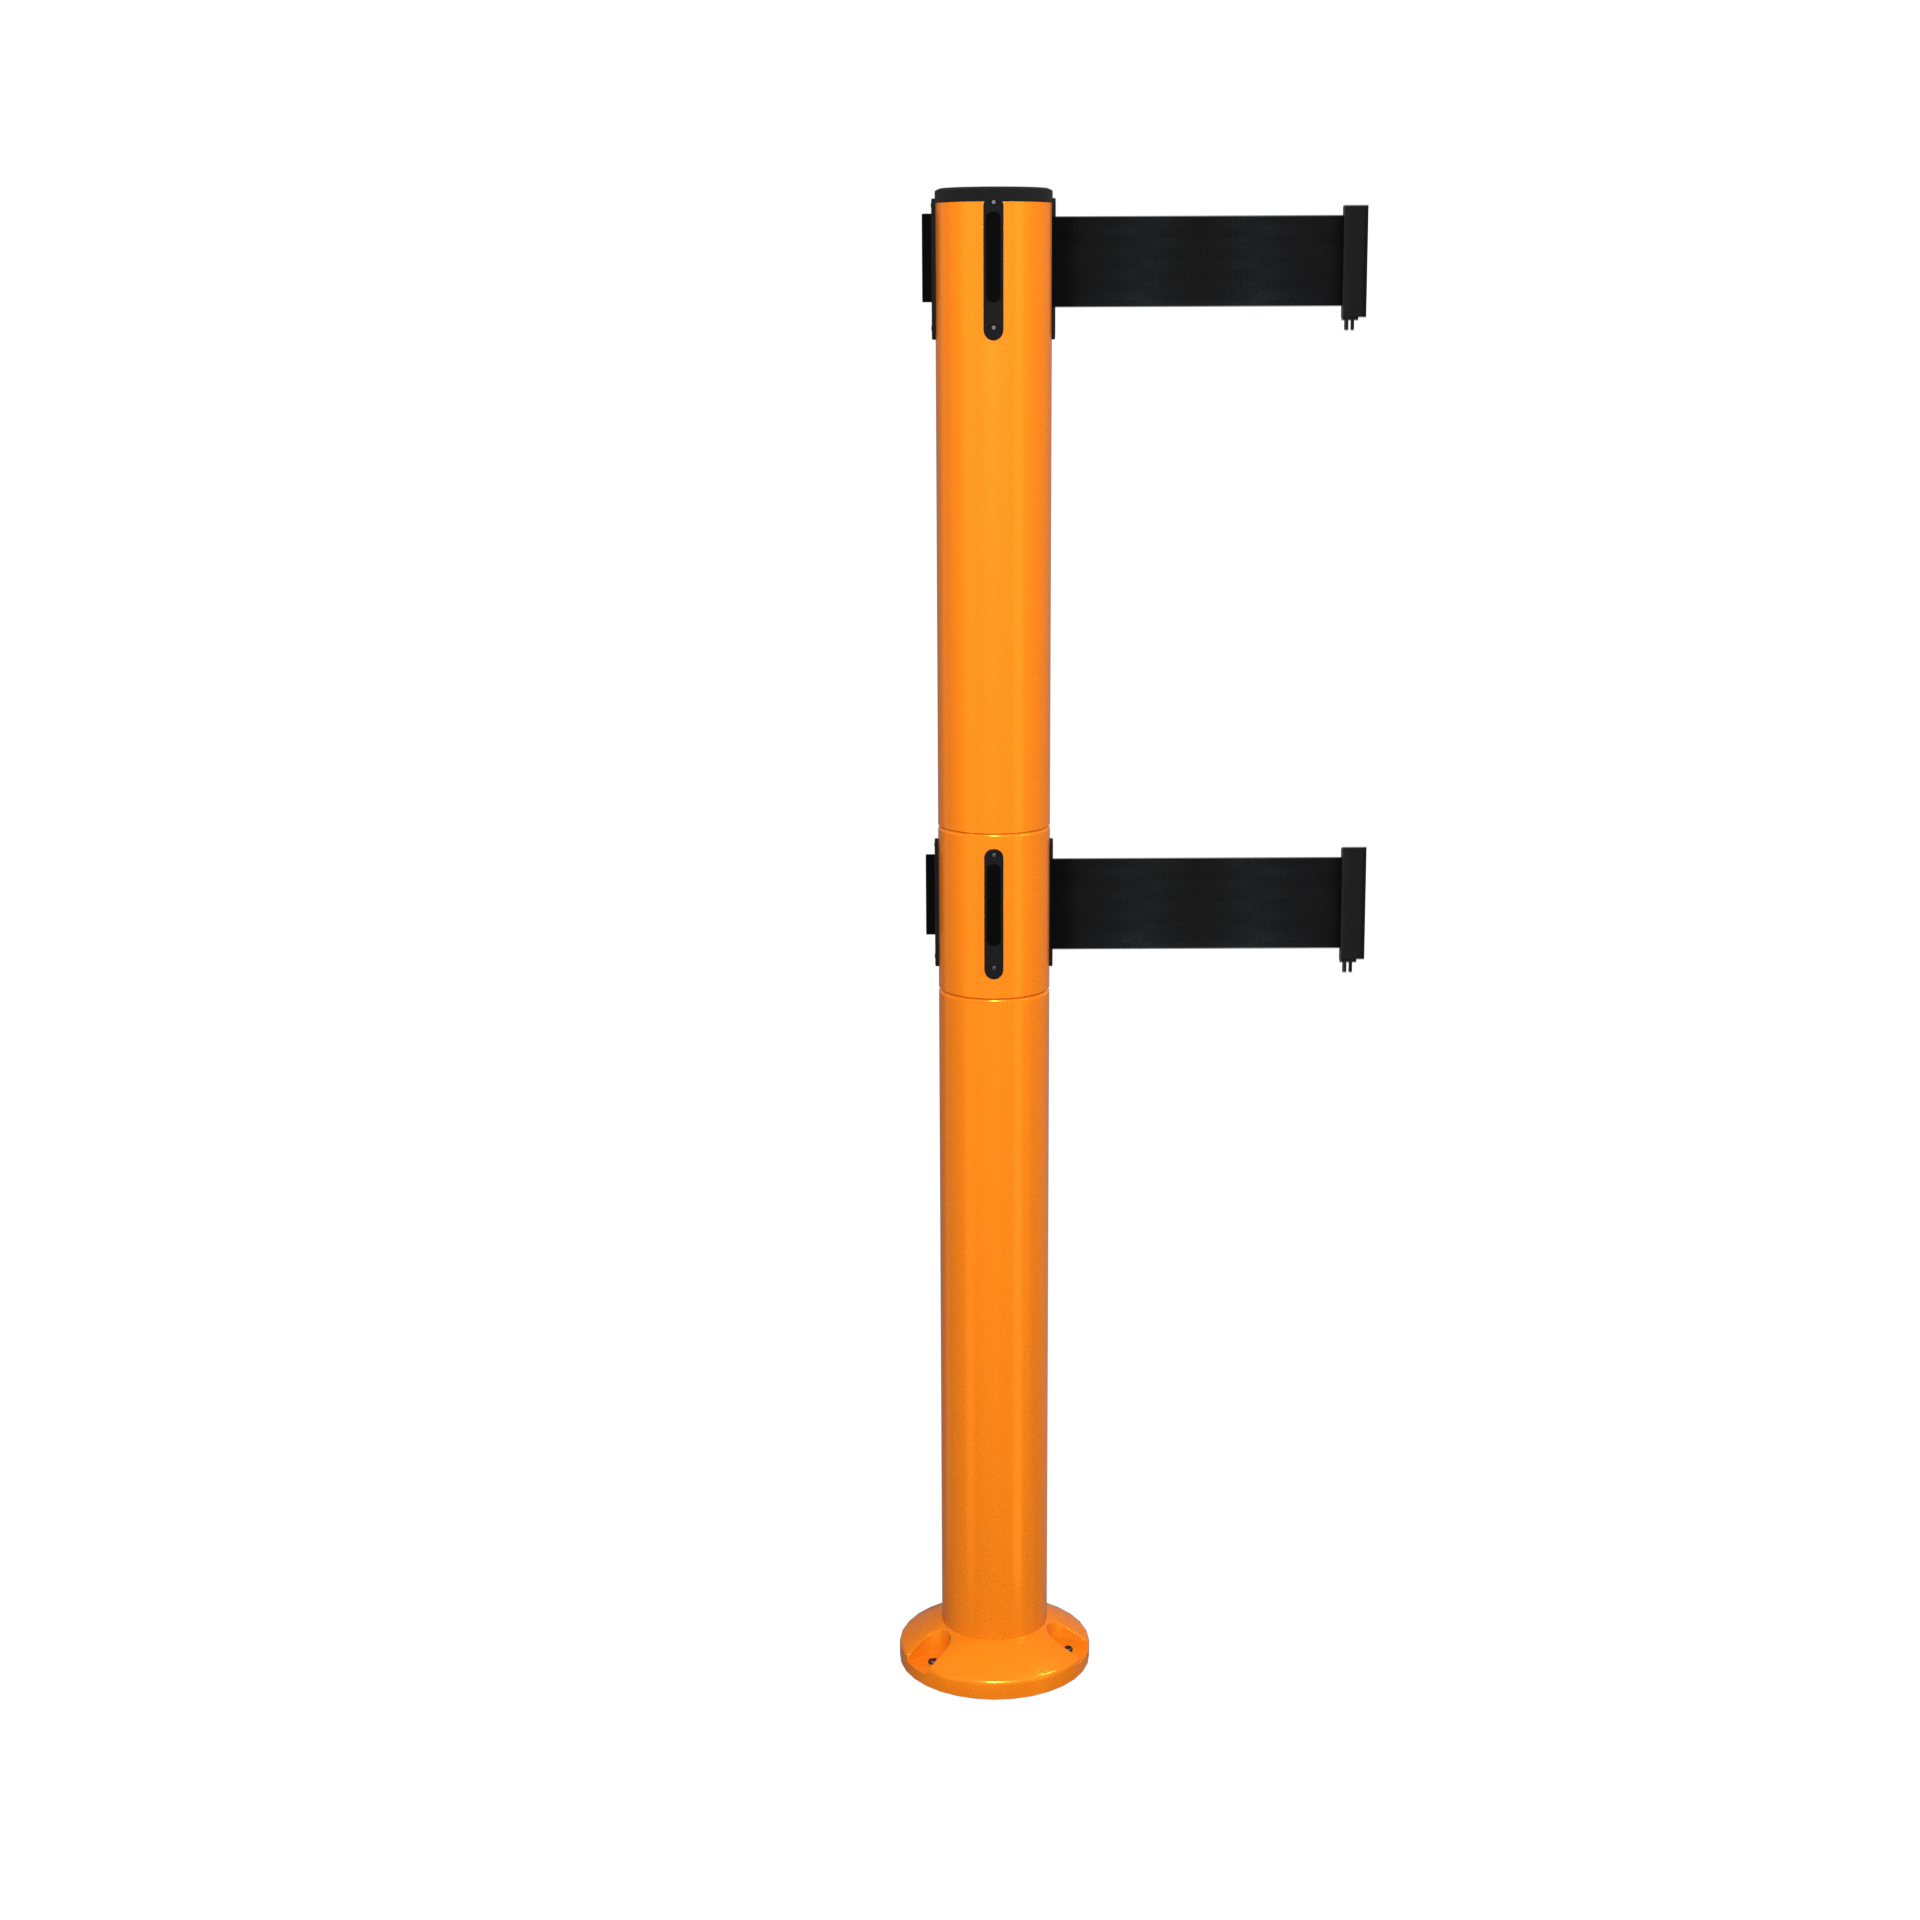 Orange SafetyPro 300 Fixed Retractable Belt Barrier with Twin Belts